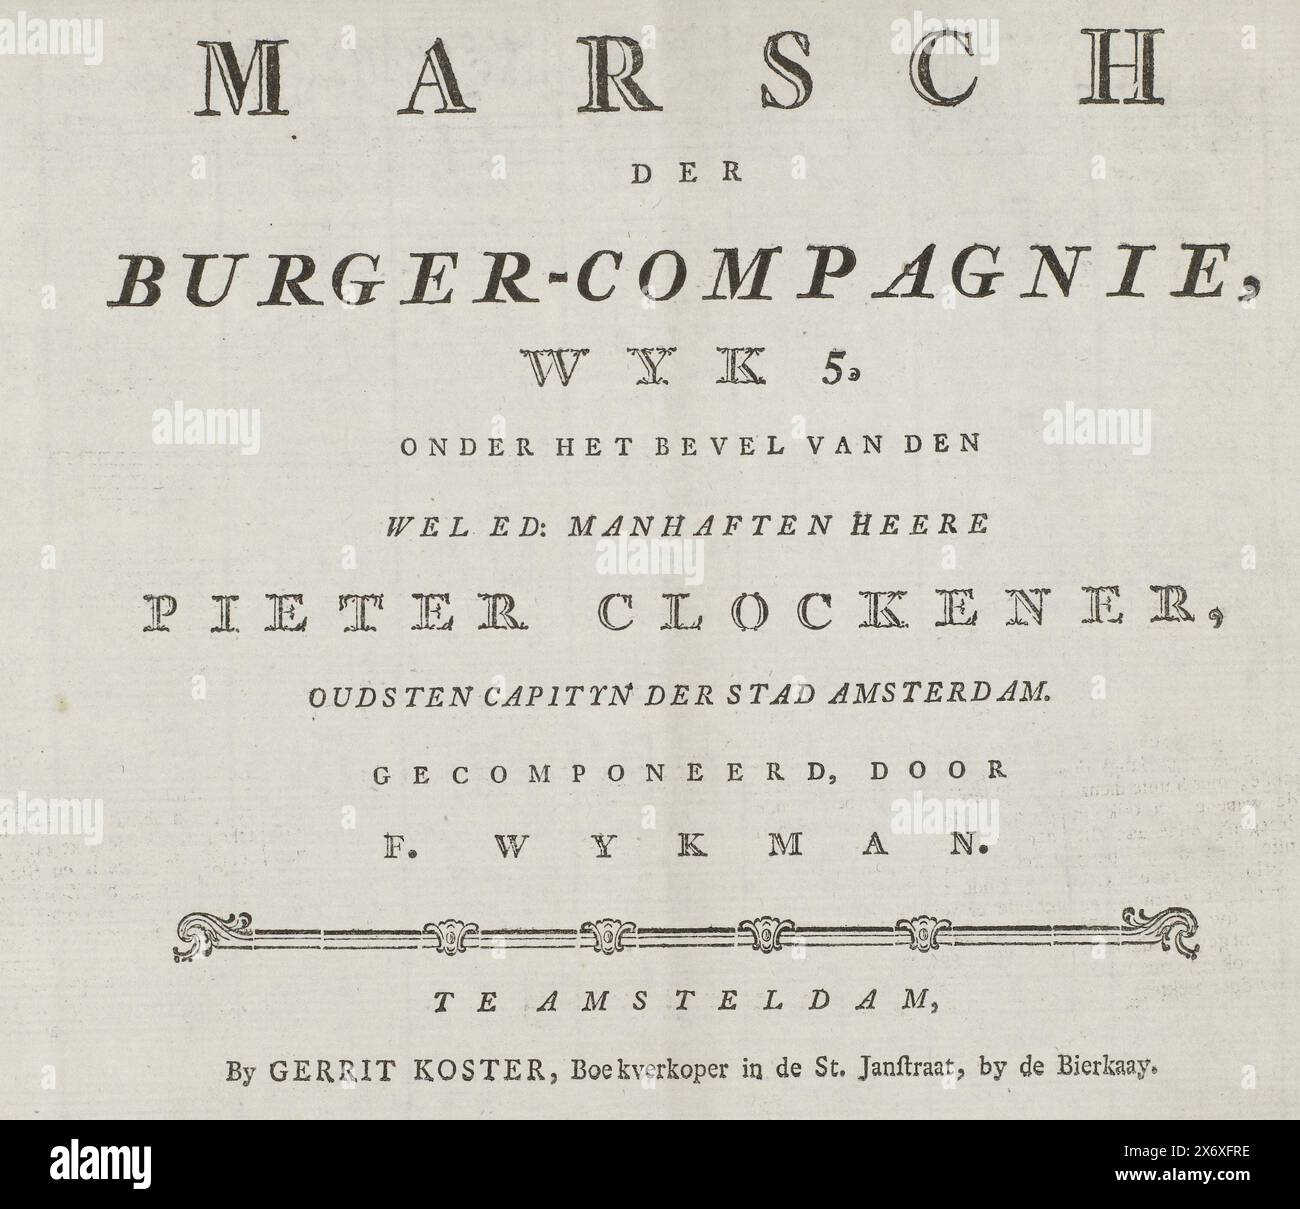 March for an Amsterdam civilian company, 1786, Marsch der Burger-compagnie, Wyk 5, under the command of den wel ed: manhaften Heere Pieter Clockener (...) (title on object), Sheet music of a march for the civilian company of district 5 of the Amsterdam militia, under the command of Captain Pieter Clockner, ca. 1786. Folded sheet with the sheet music and the text of the next 4 verses inside., F. Wijkman, (mentioned on object), T. Jukkenekke (II), (mentioned on object), publisher: Gerrit Koster, (mentioned on object), Amsterdam, 1786, paper, etching, engraving, letterpress printing, height, 206 Stock Photo